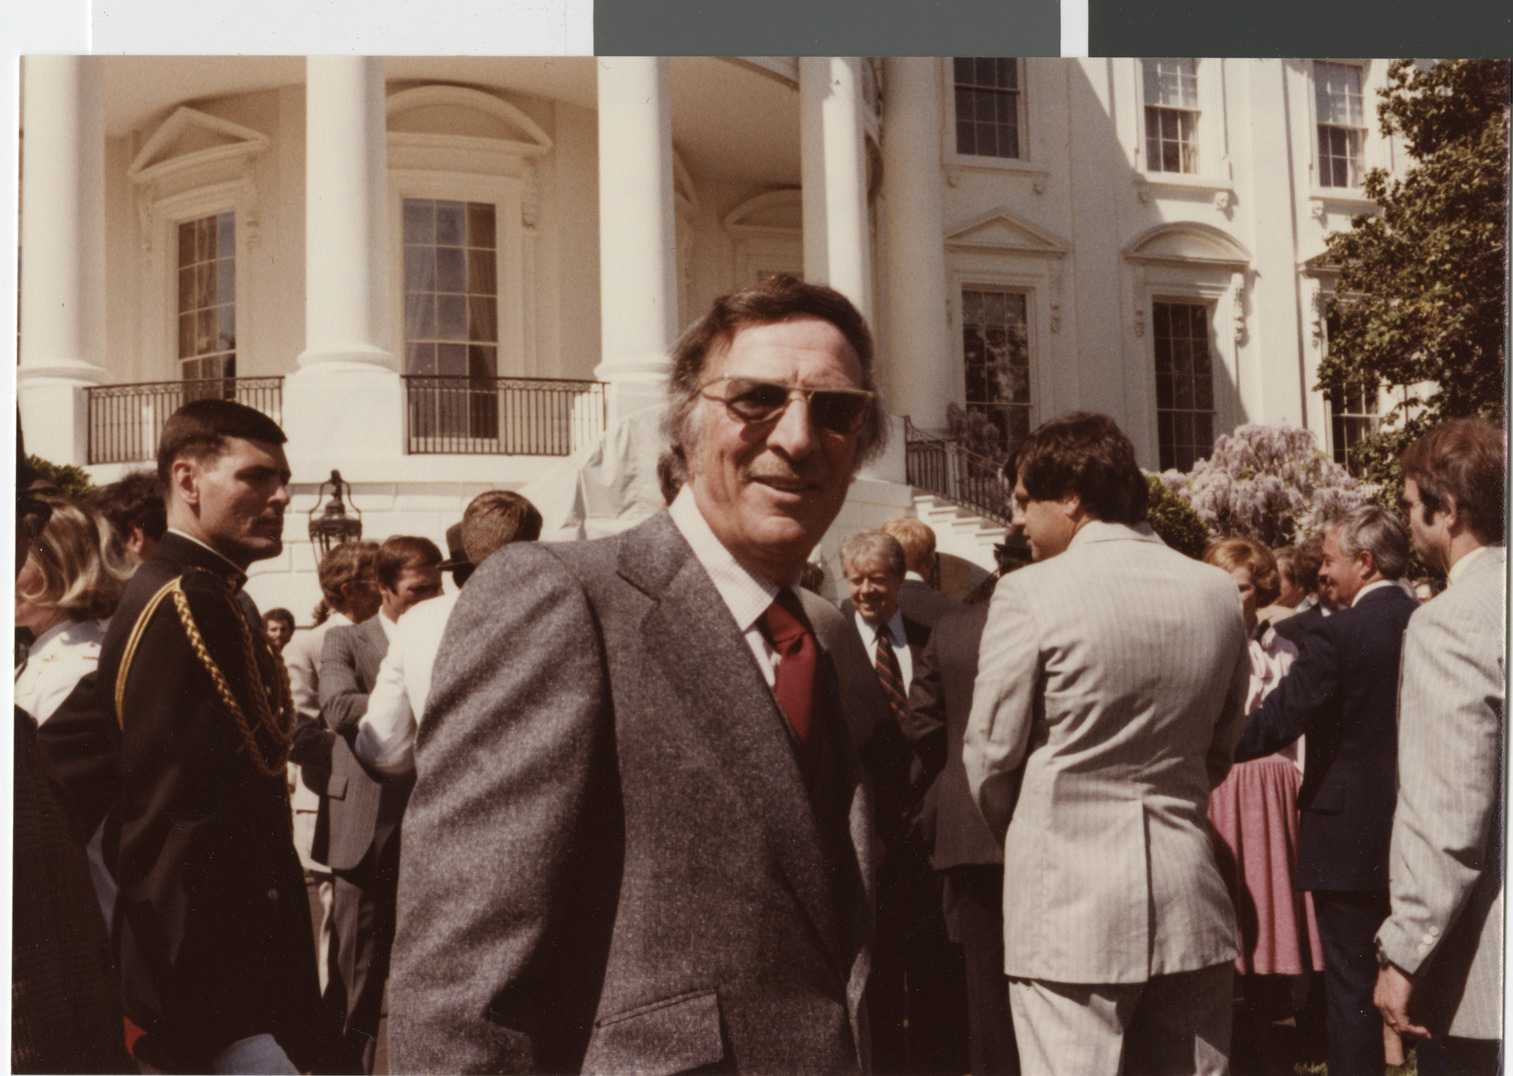 Photograph of Henry Kissinger, Hank Greenspun, and Jerry Mack, at peace treaty signing (?), 1979